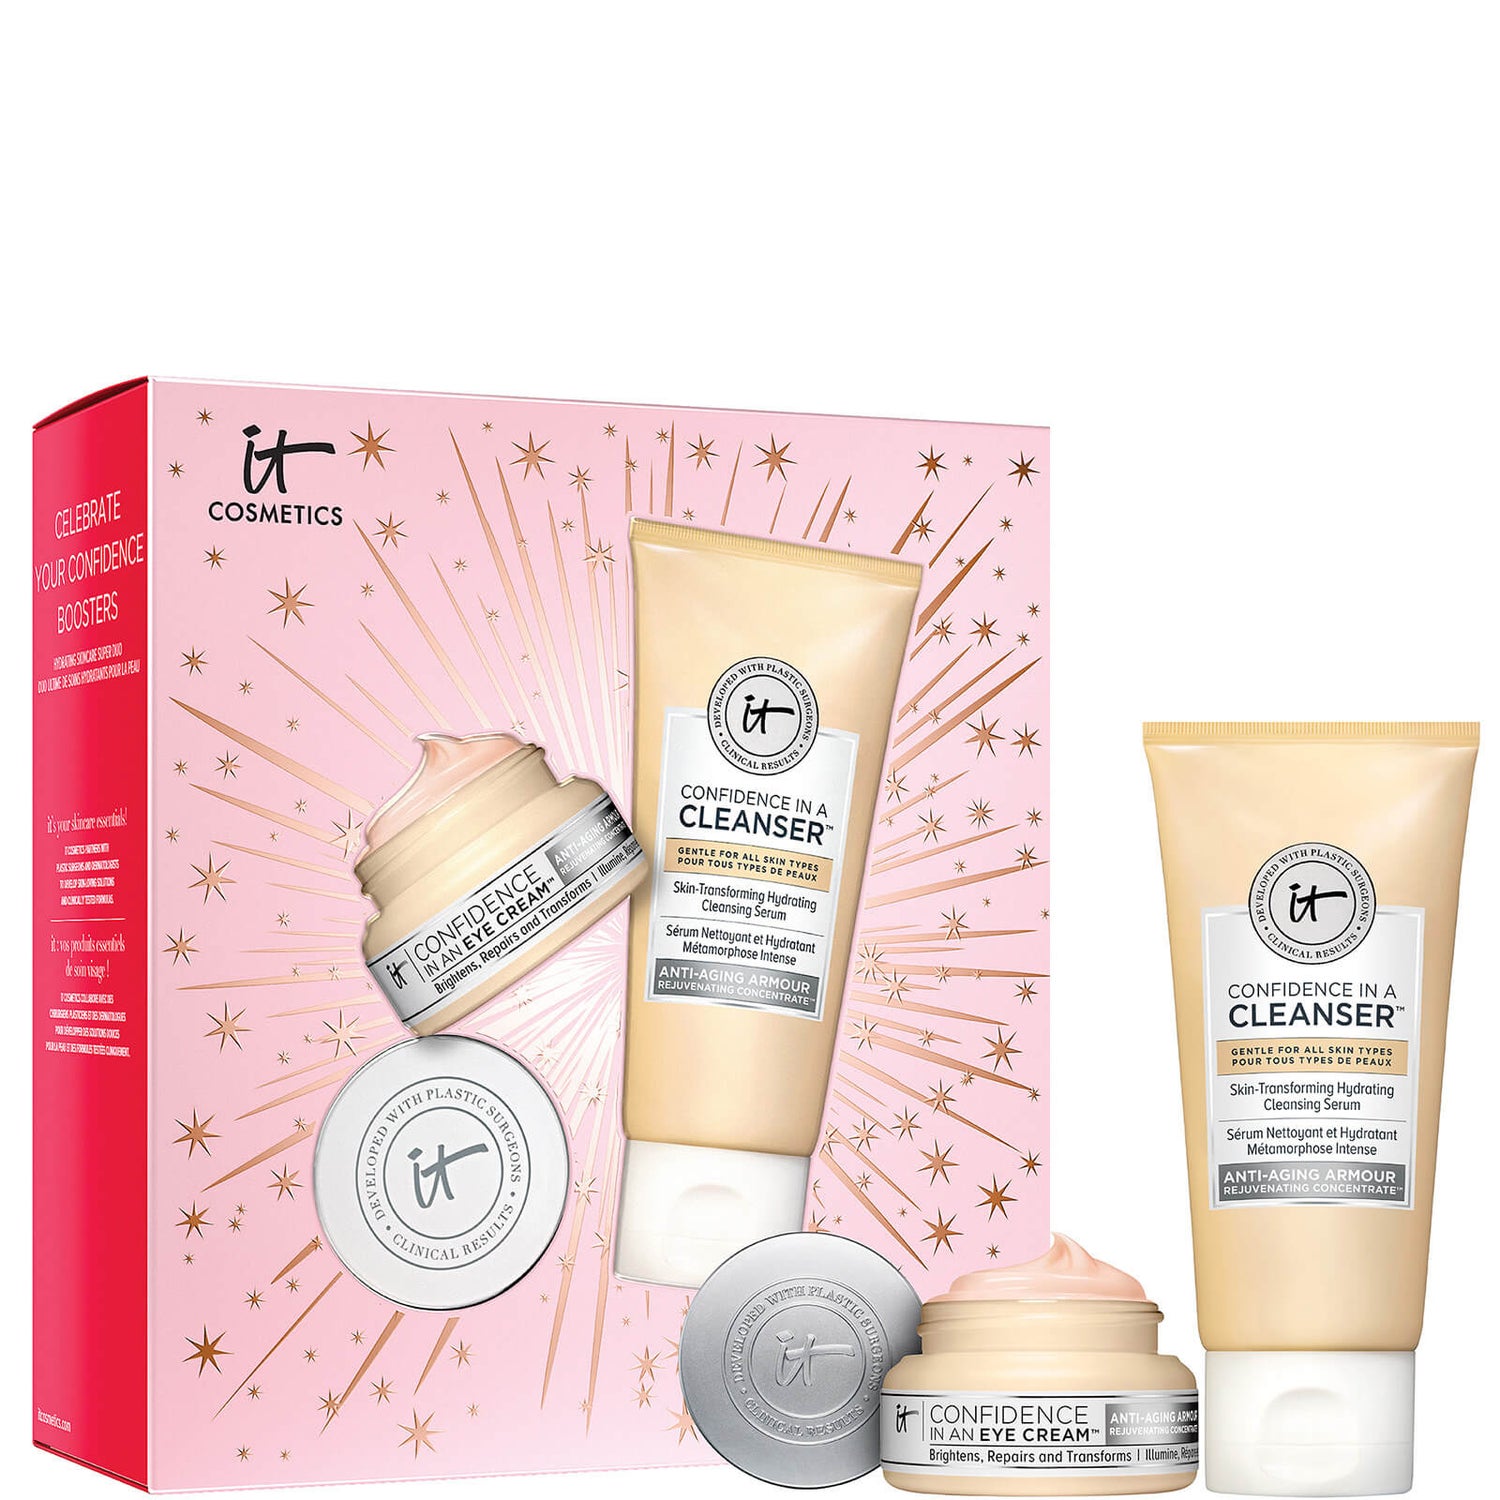 IT Cosmetics Celebrate Your Confidence Boosters (Worth £40.50)